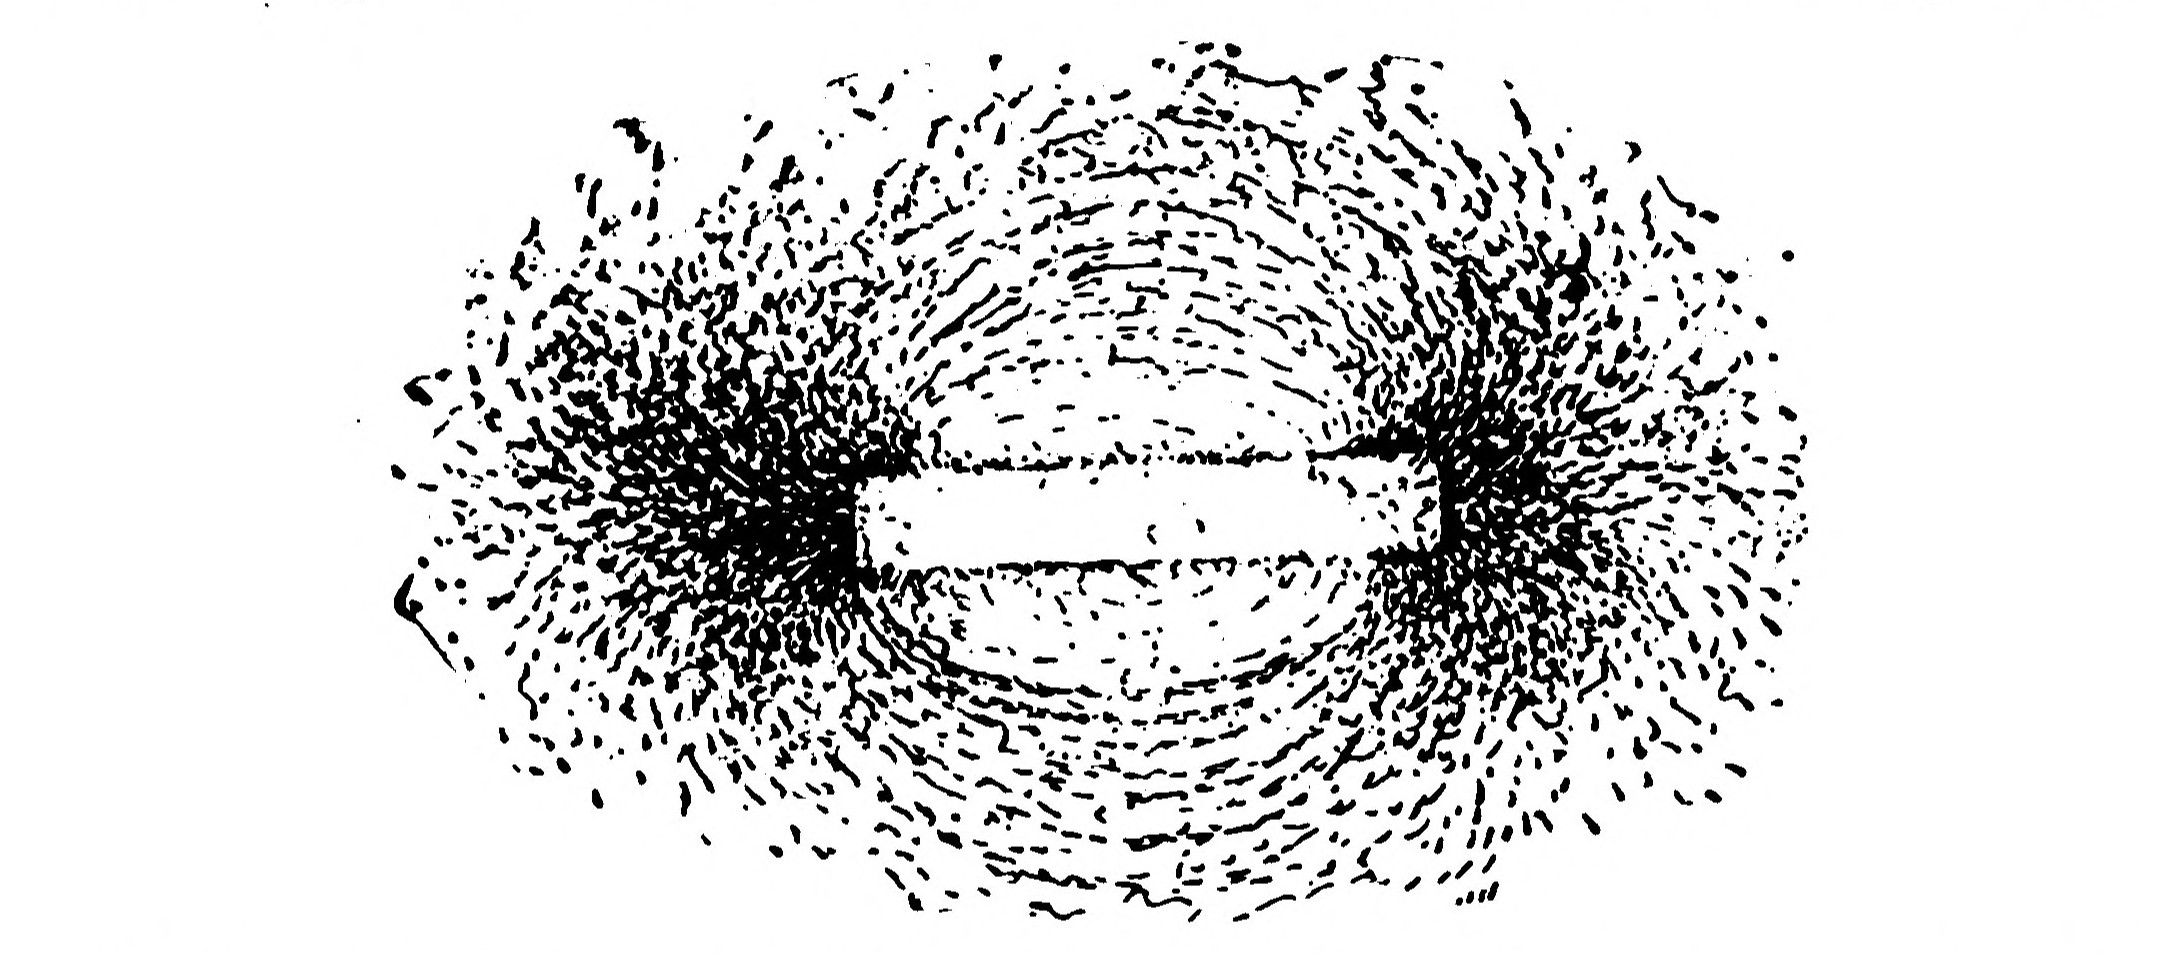 FIG. 180.—Magnetic Phantom showing the Lines of Force about a Bar Magnet.